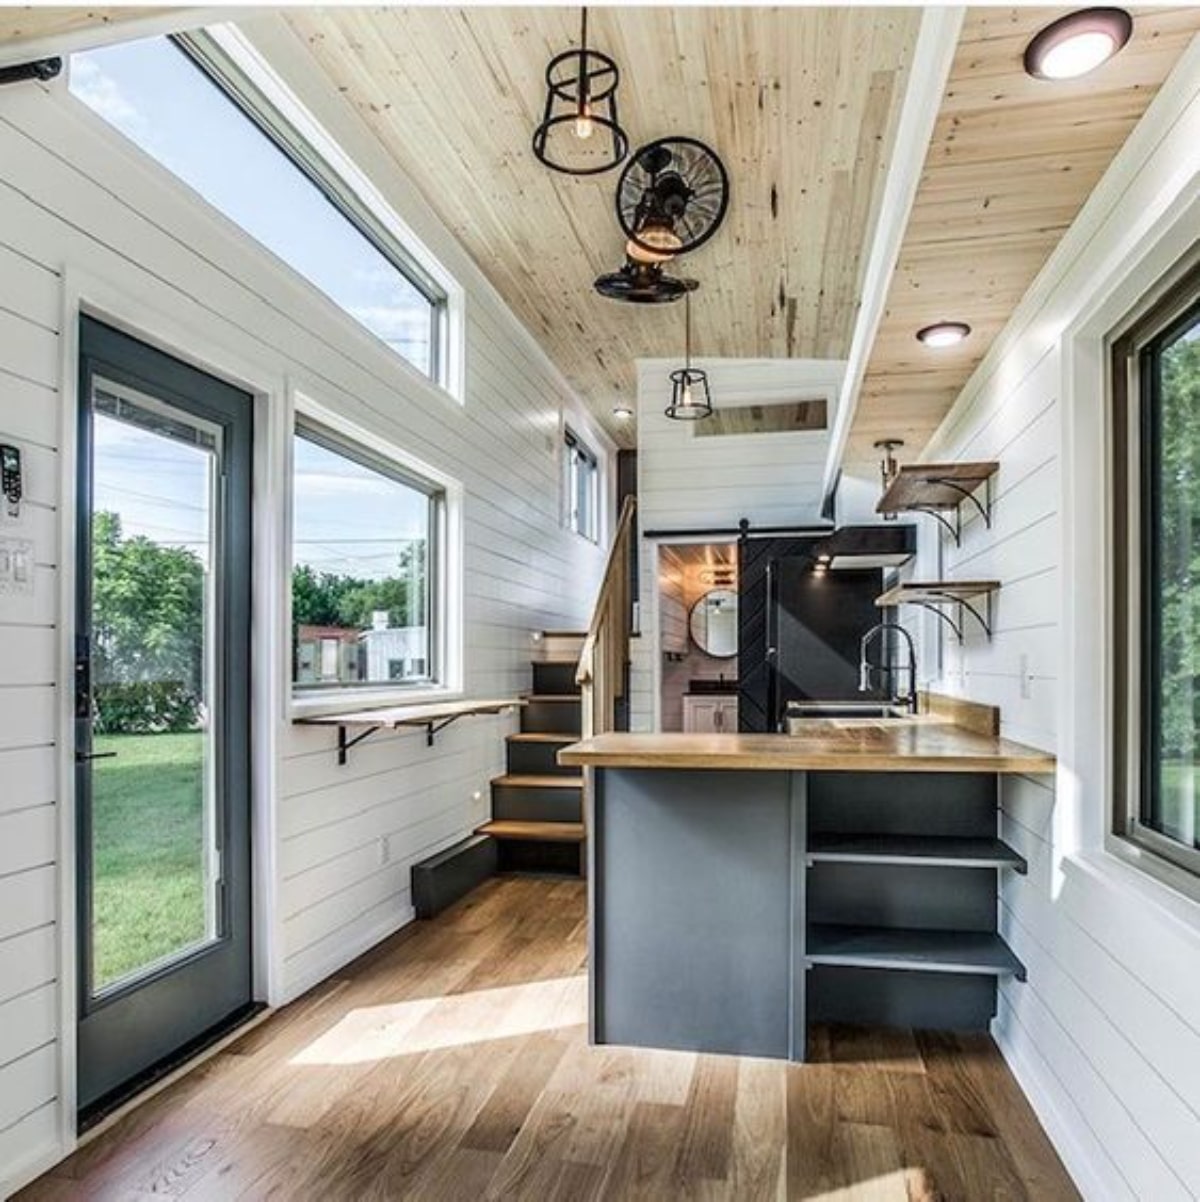 20+ Incredible Luxury Modern Tiny Homes With Huge Windows and